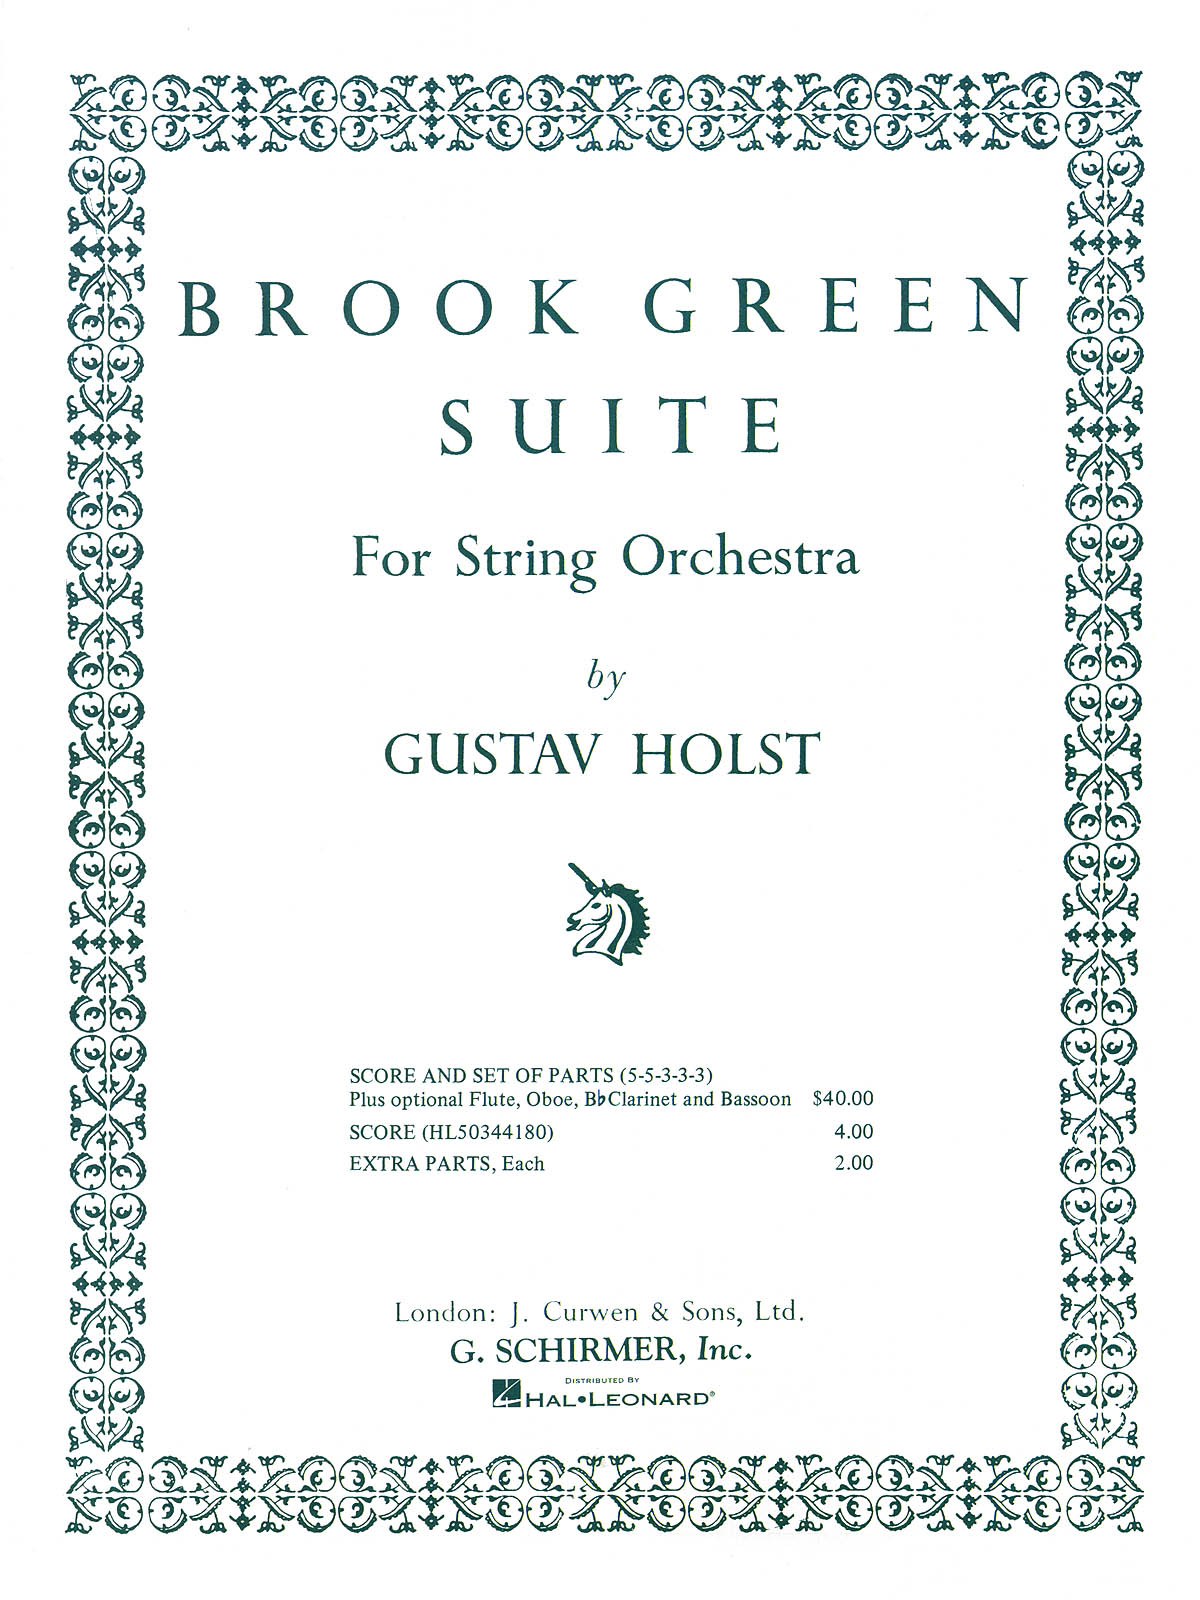 Gustav Holst: Brook Green Suite: String Orchestra: Score and Parts